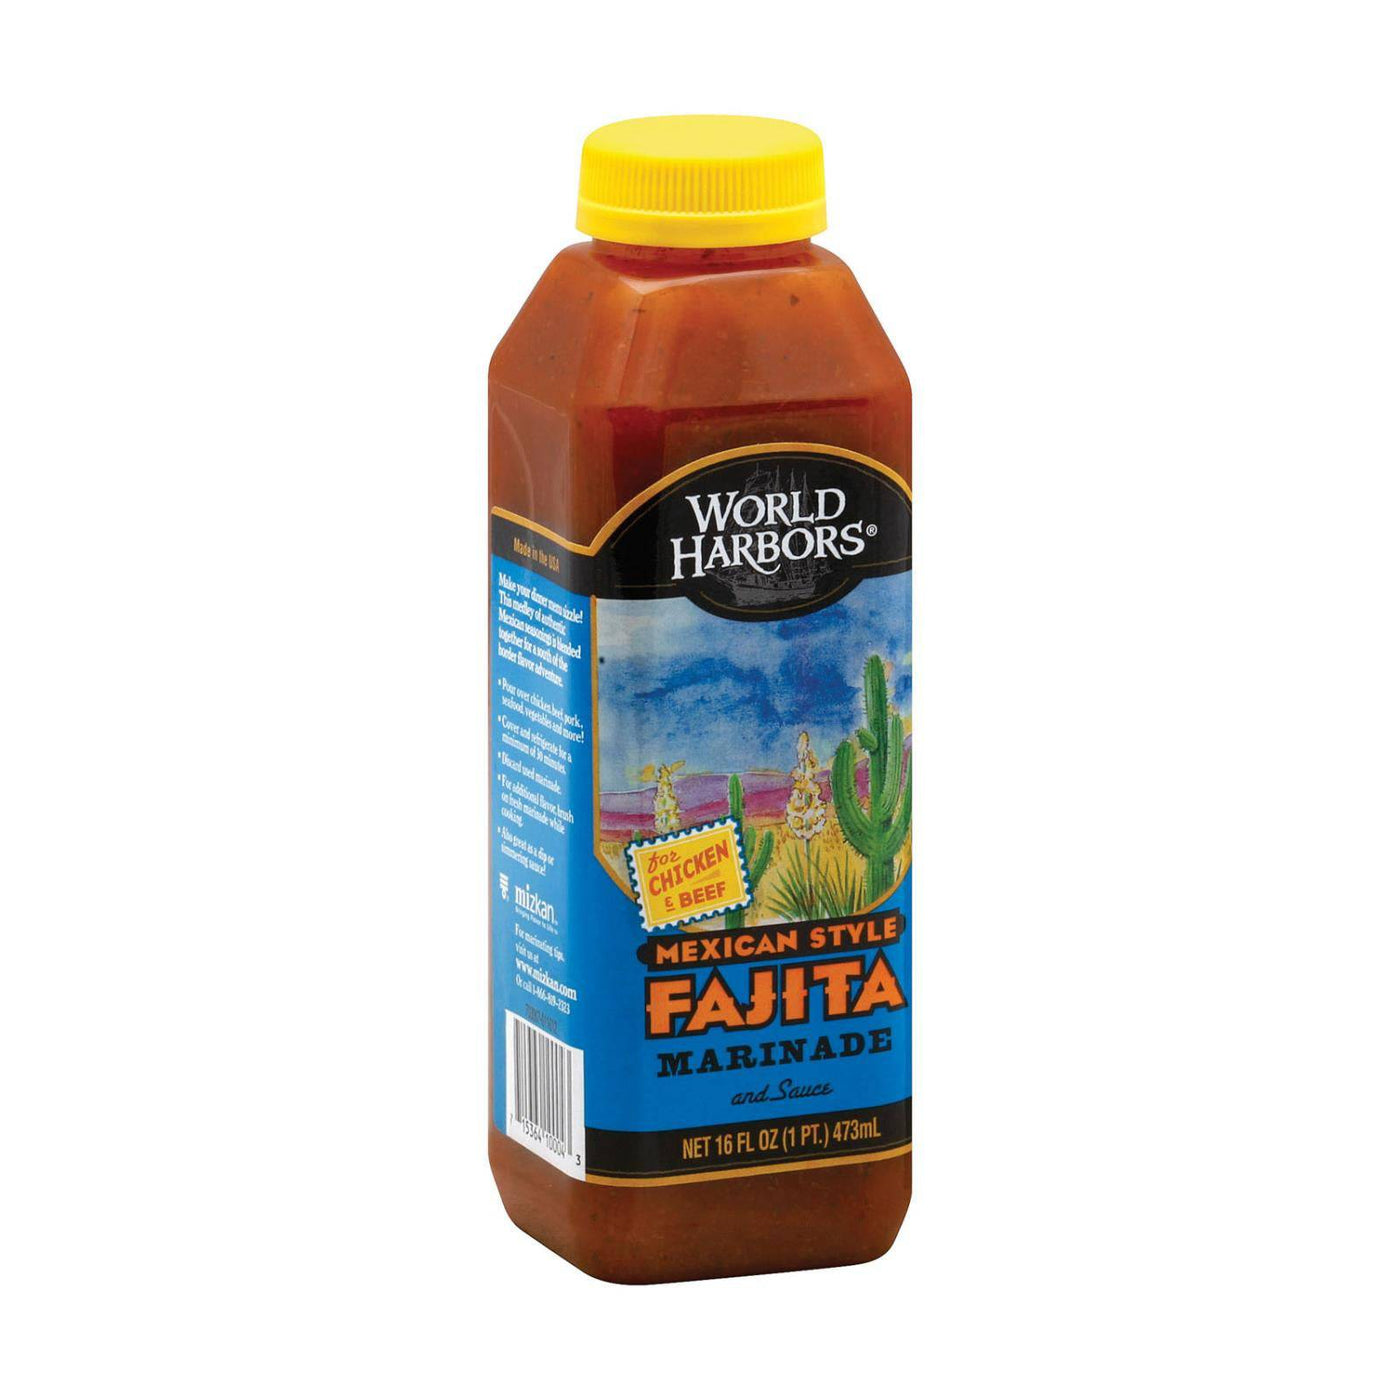 World Harbor Fajita Marinade And Sauce Mexican Style - Case Of 6 - 16 Fl Oz. | OnlyNaturals.us